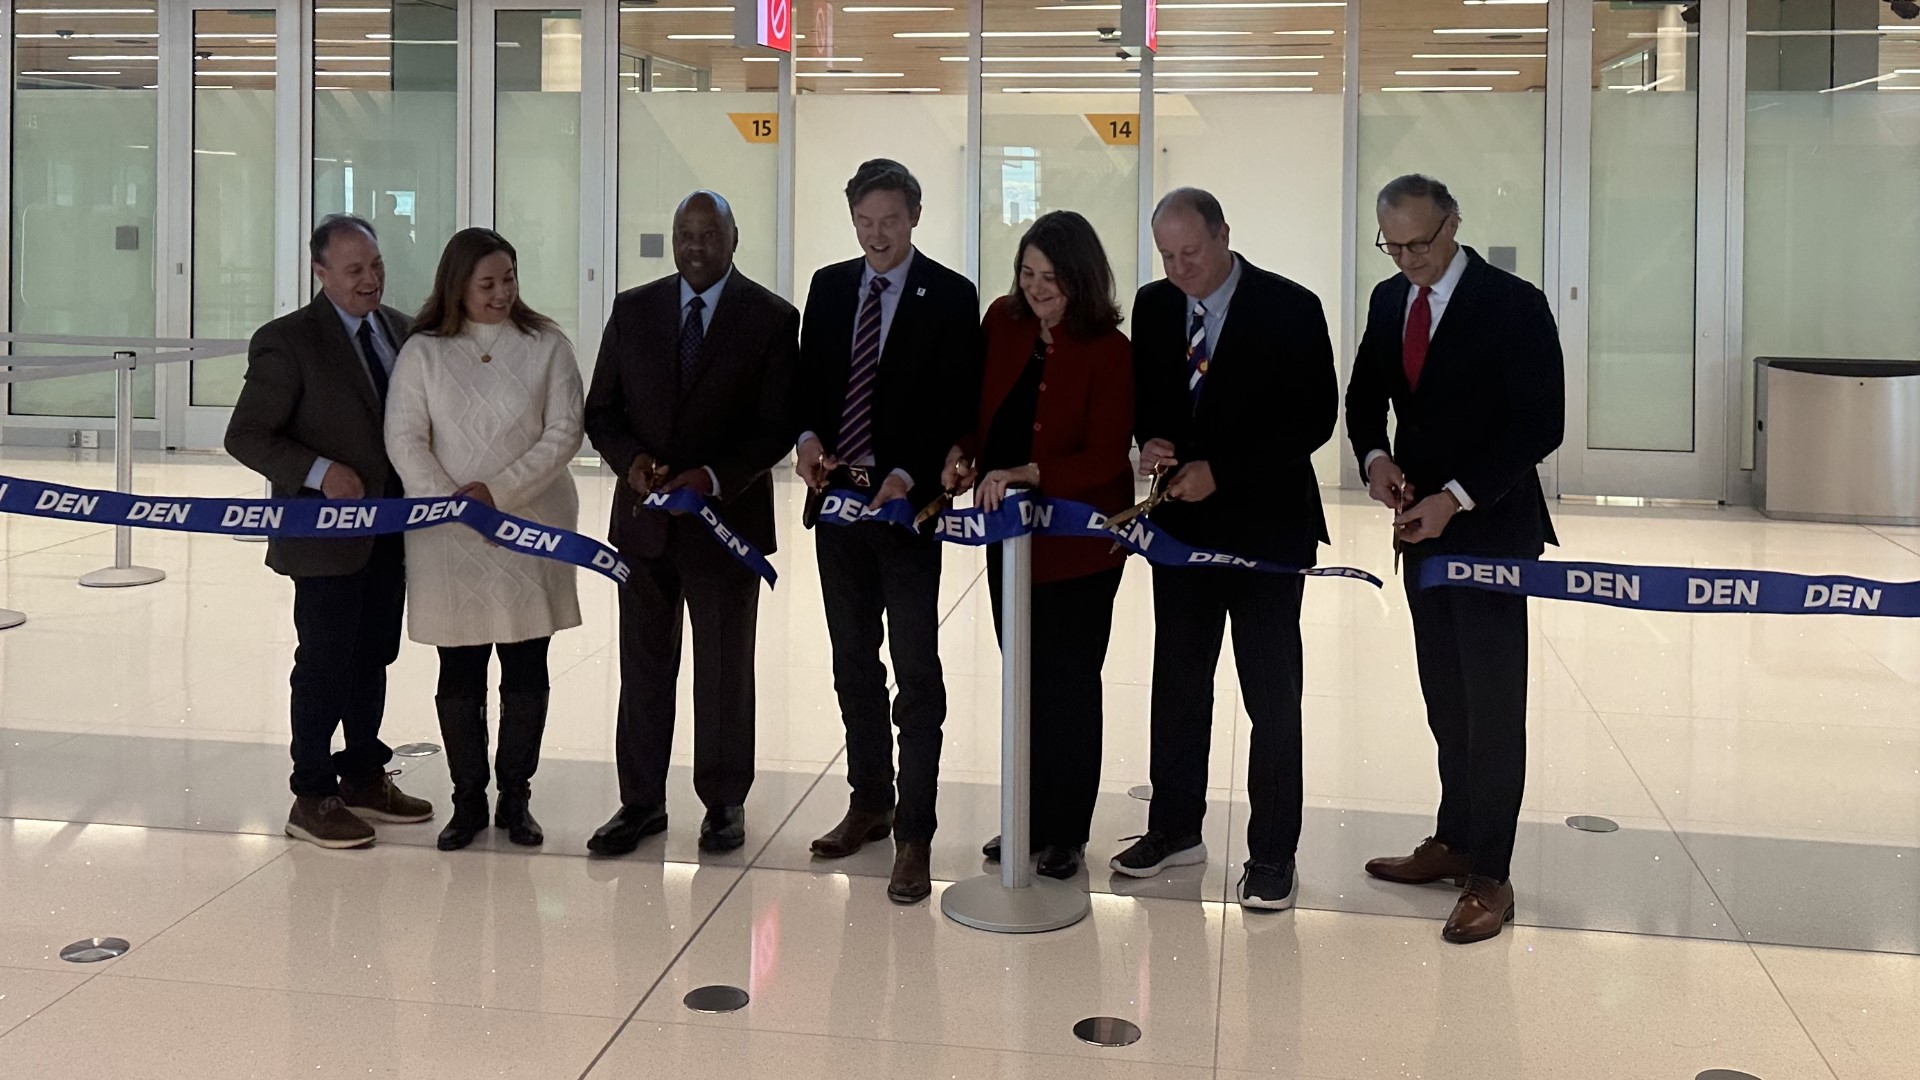 After a soft opening, 17 technologically-advanced security checkpoint lanes are officially opening to travelers at one of the world's busiest airports.